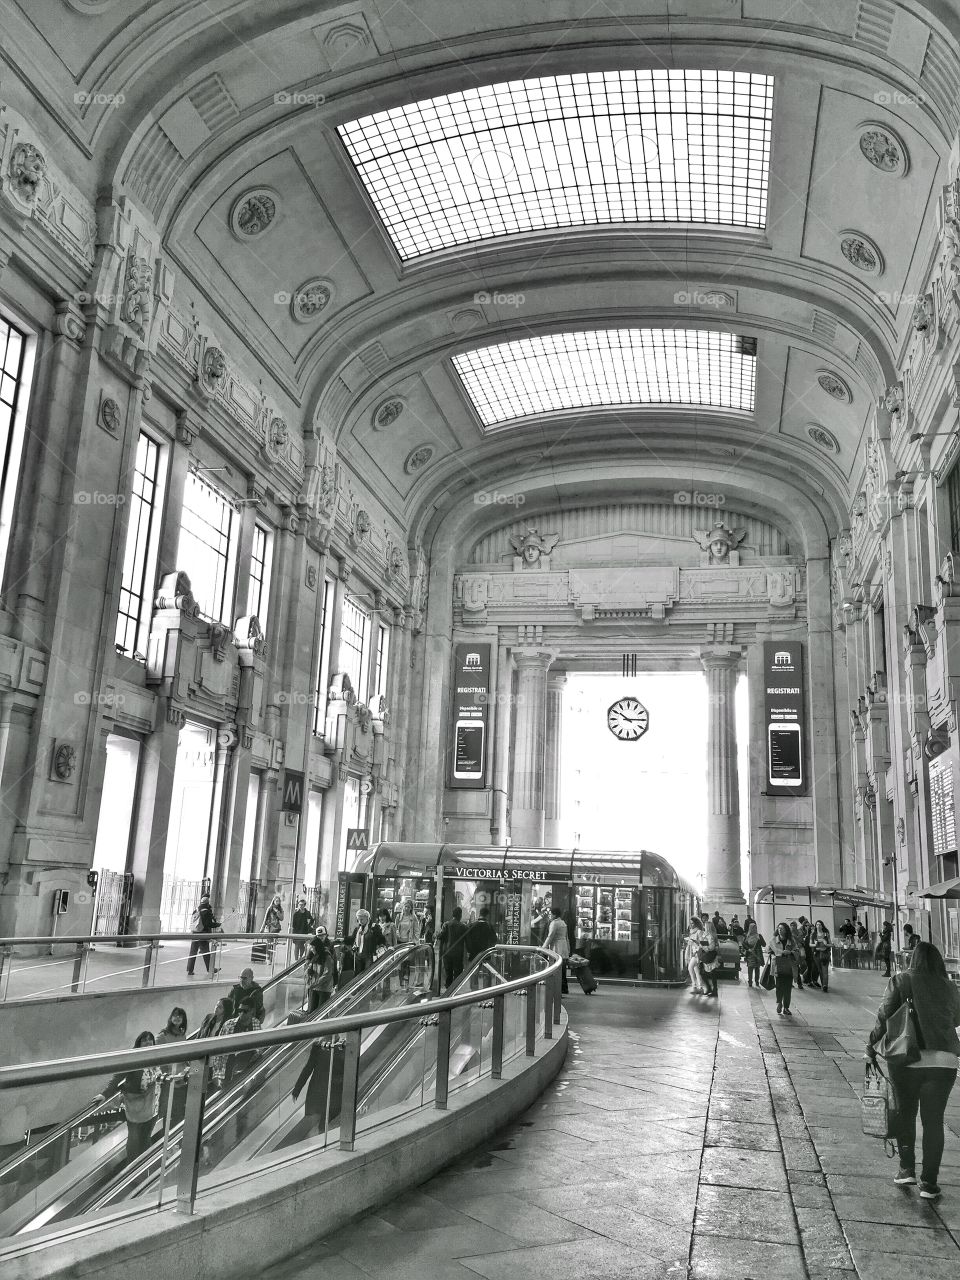 Interior view of Milan Central Station